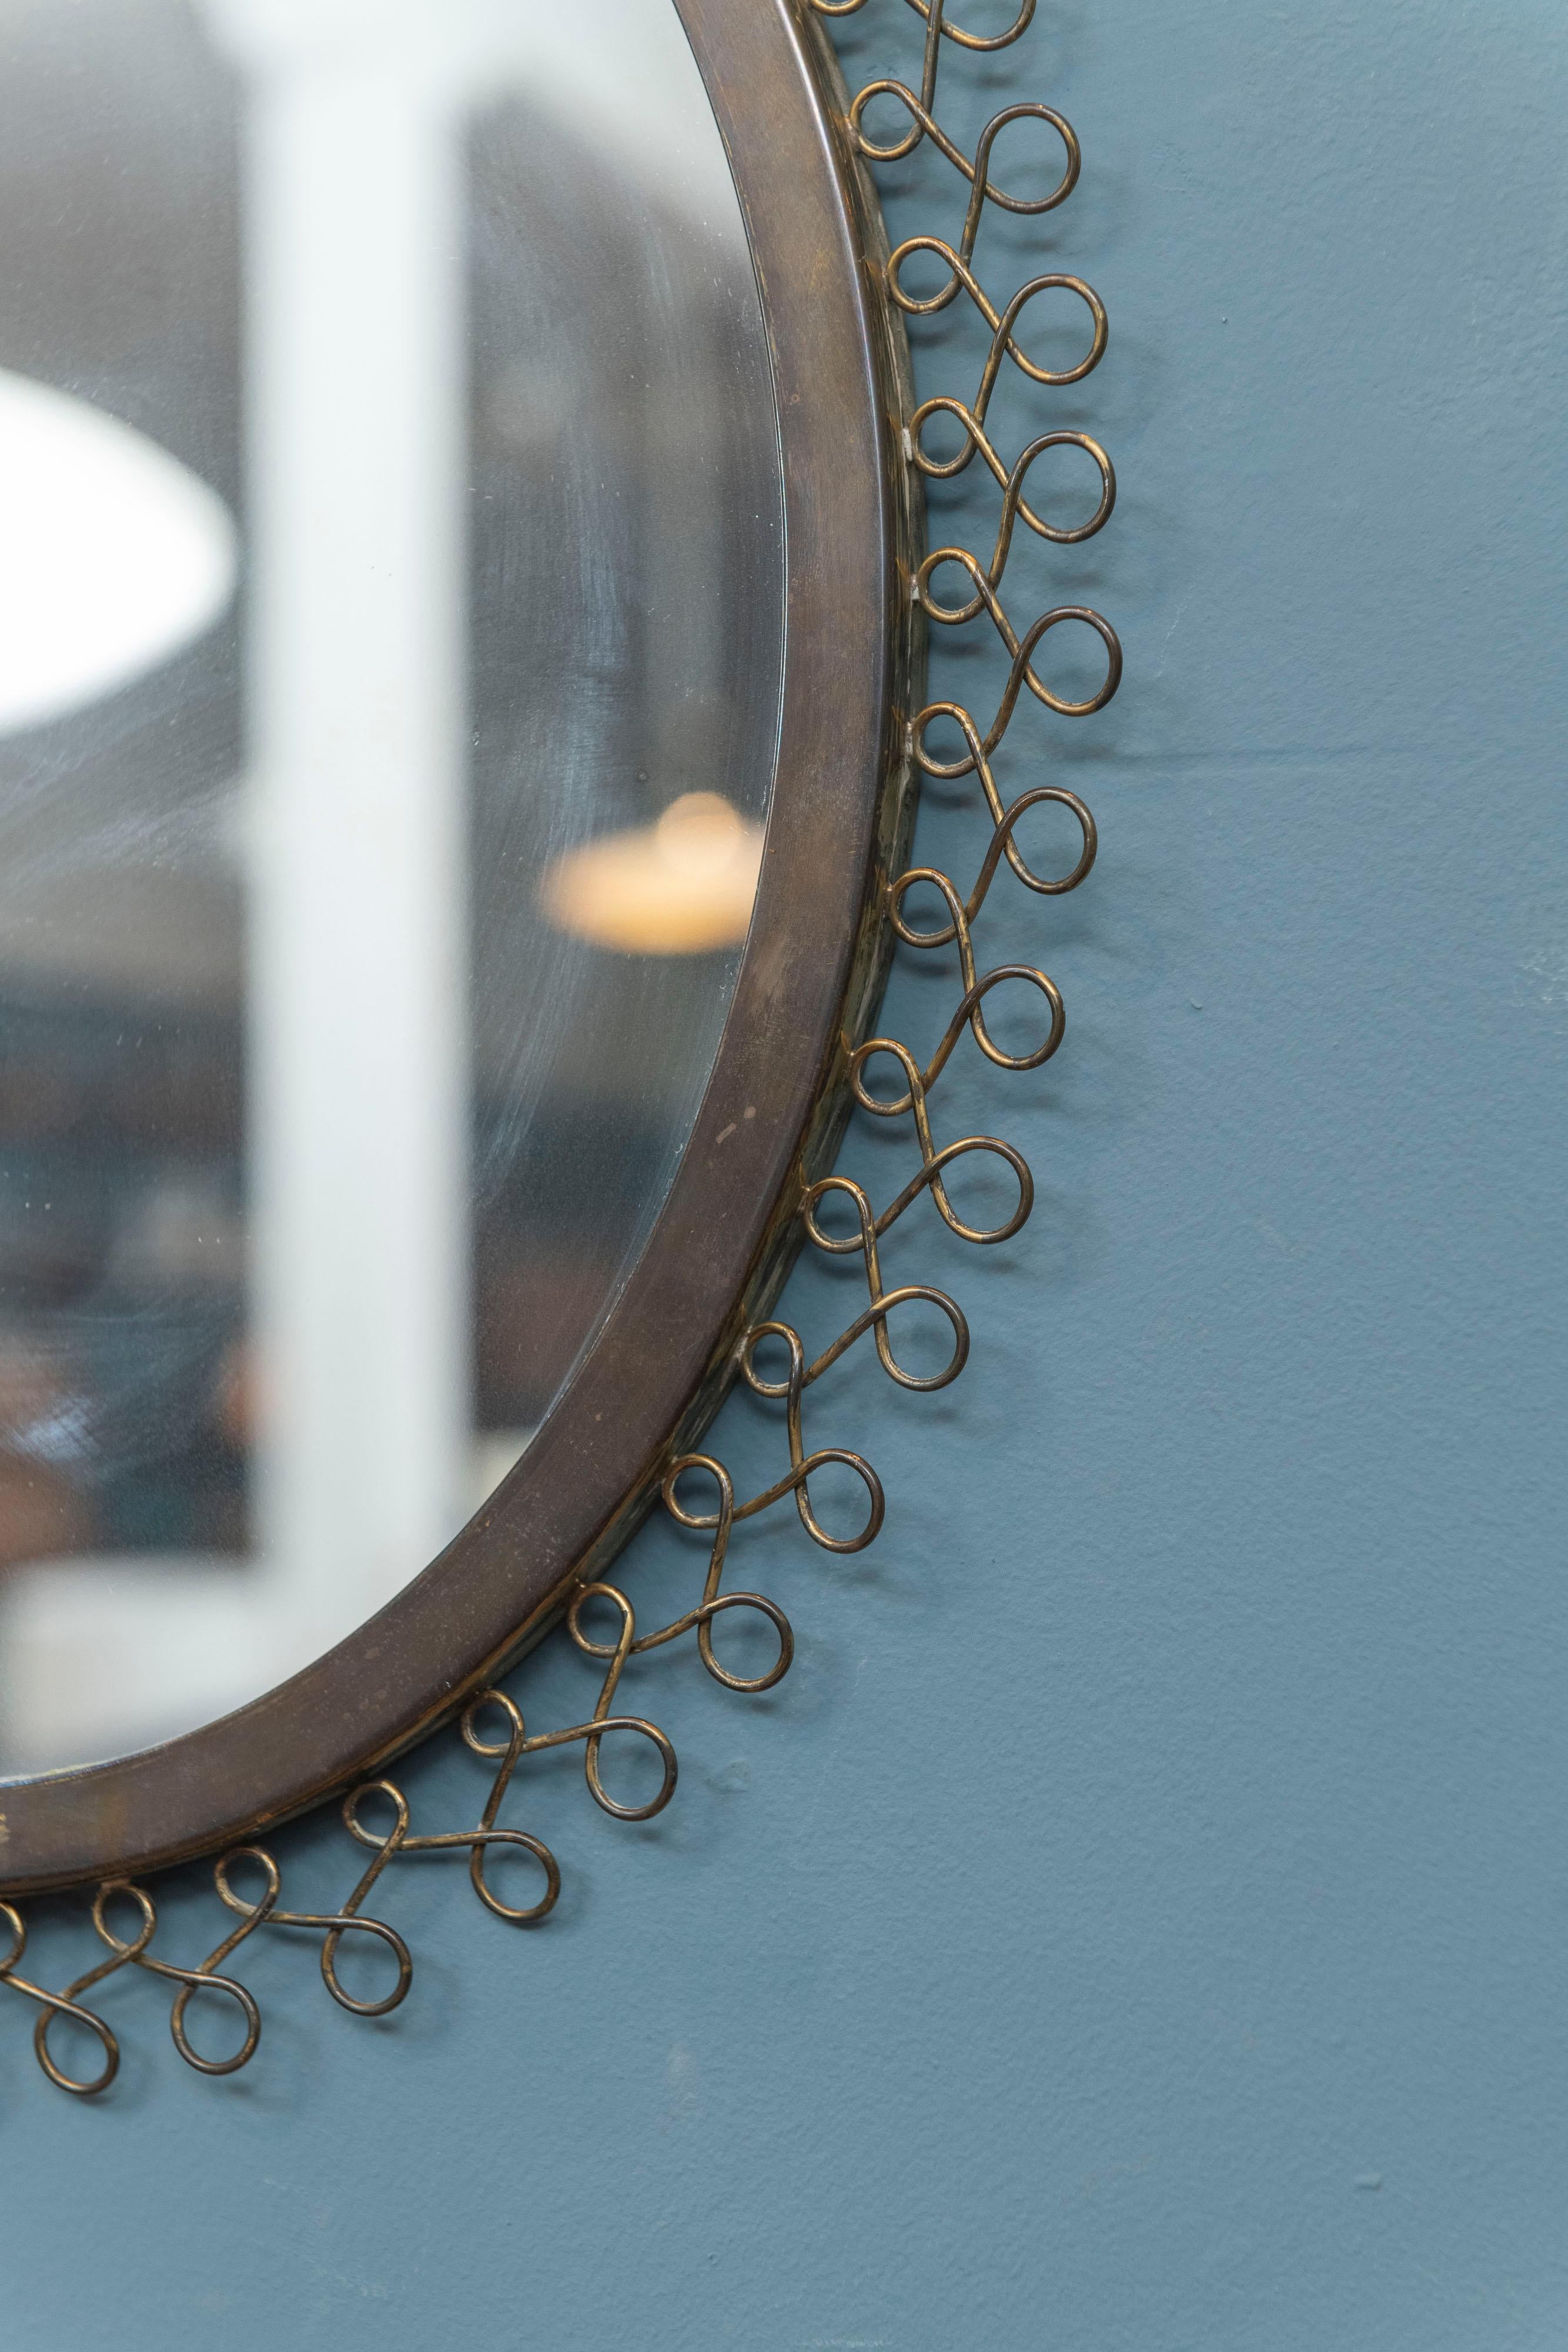 Scandinavian modern oval brass wall mirror made with looping decorative fretwork, made in Sweden.